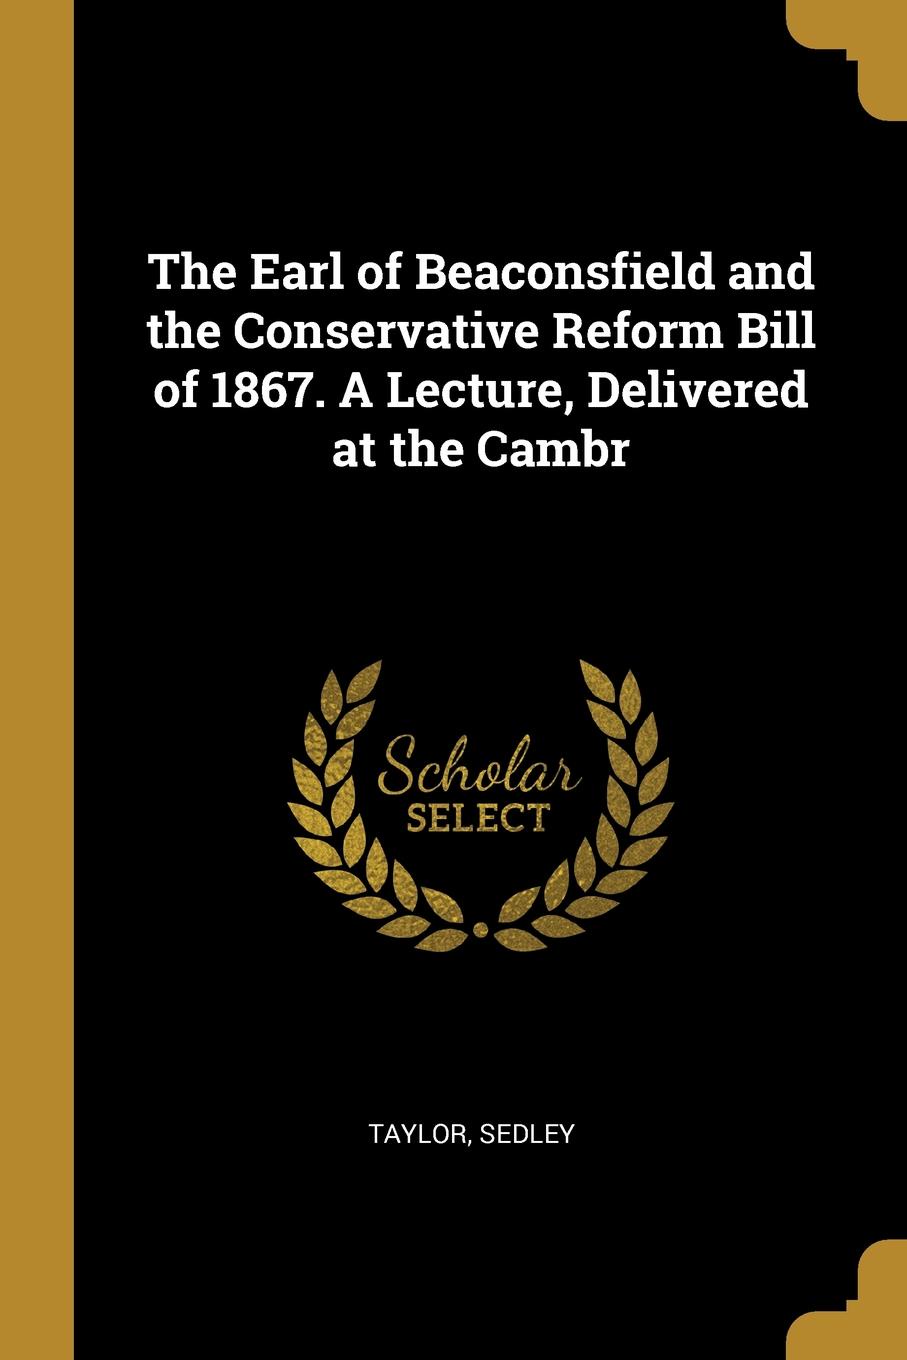 The Earl of Beaconsfield and the Conservative Reform Bill of 1867. A Lecture, Delivered at the Cambr